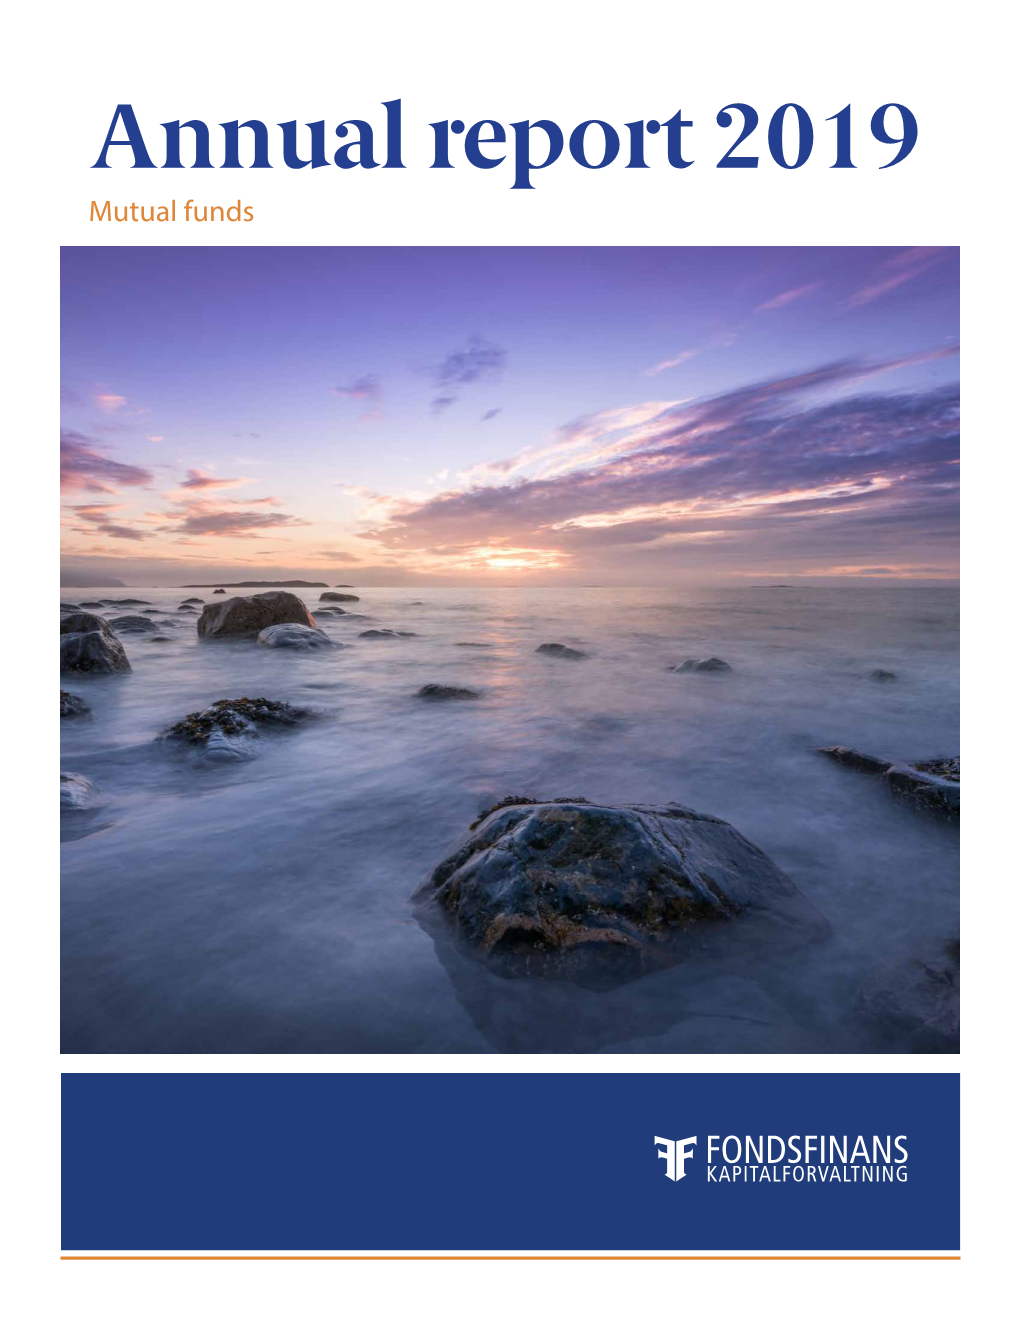 Annual Report 2019 Mutual Funds